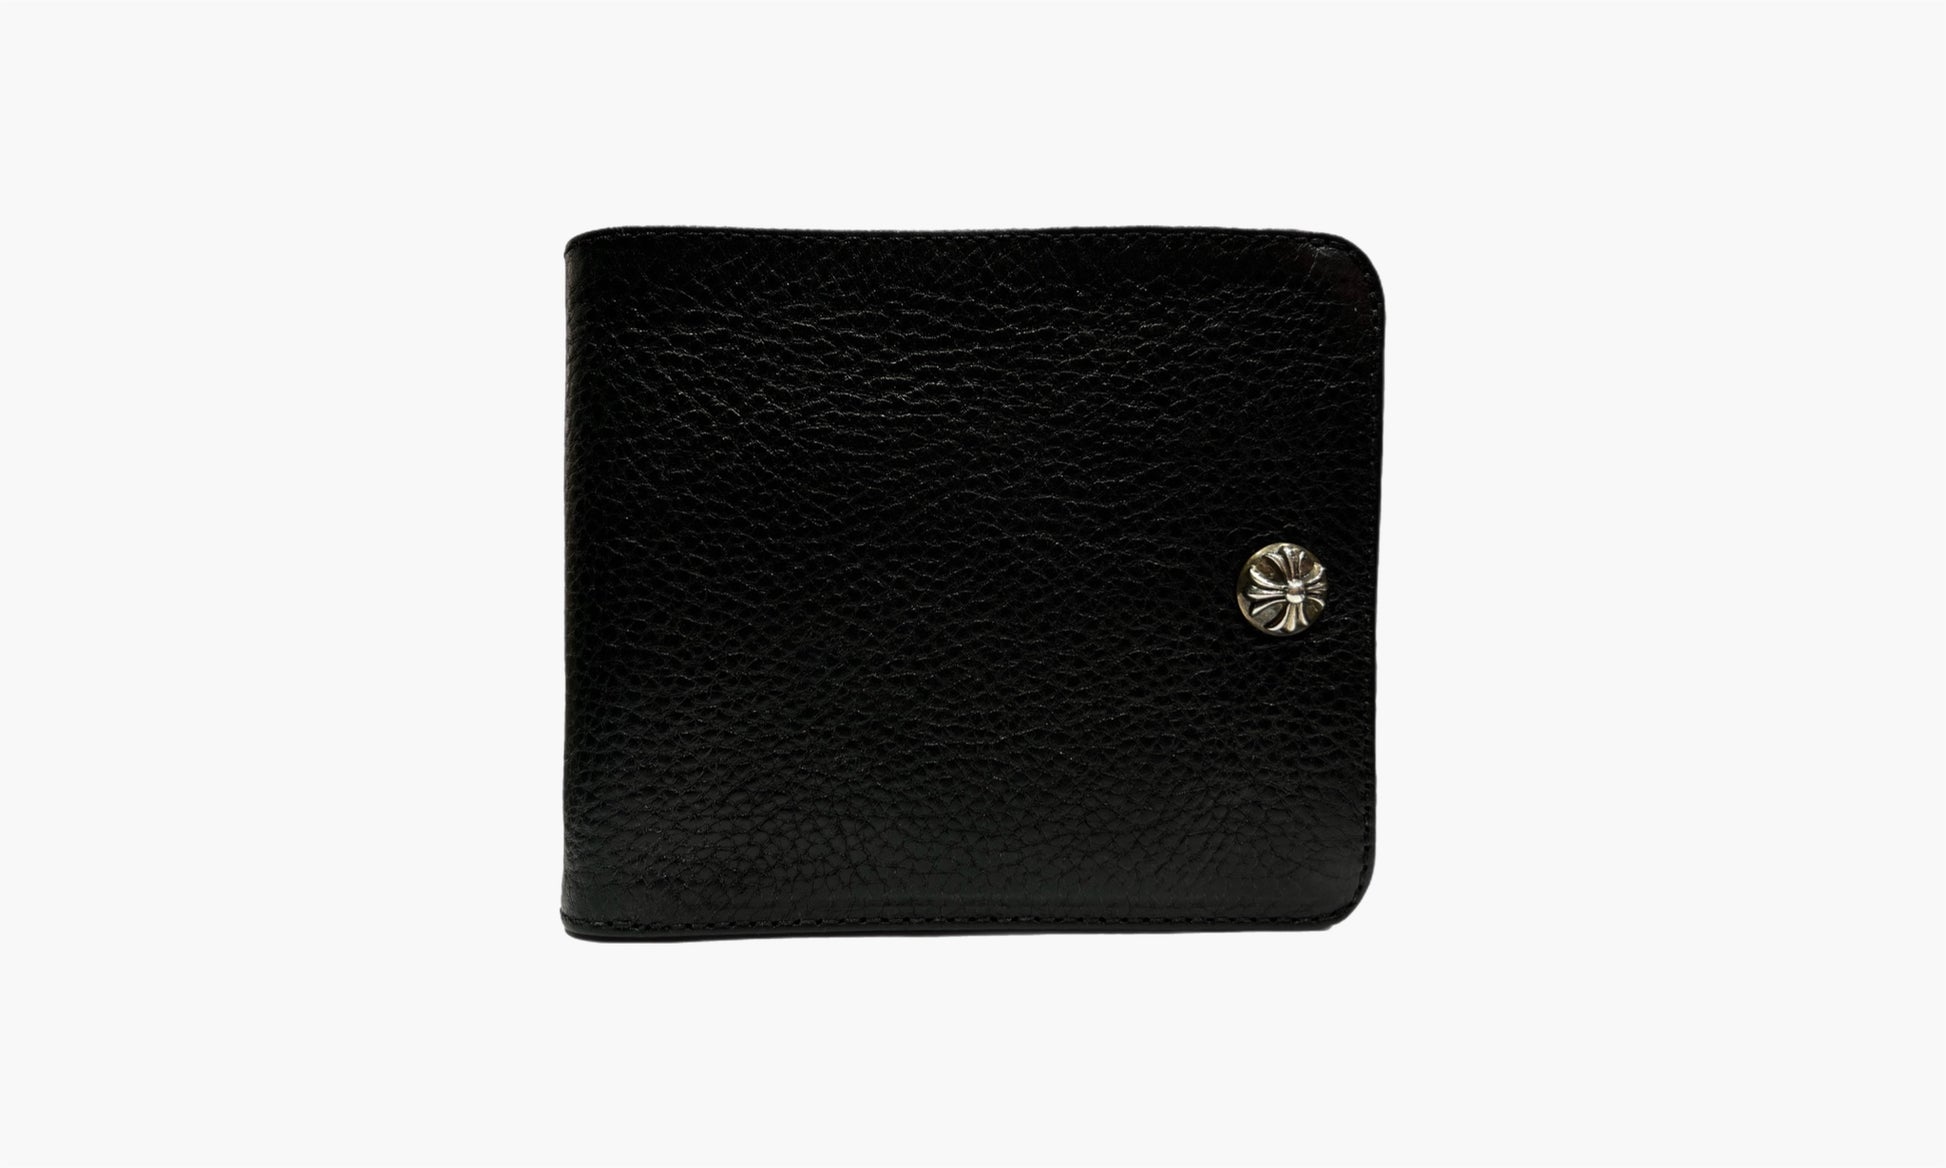 Chrome Hearts One Snap Cross Button Leather Wallet Black | The Sortage